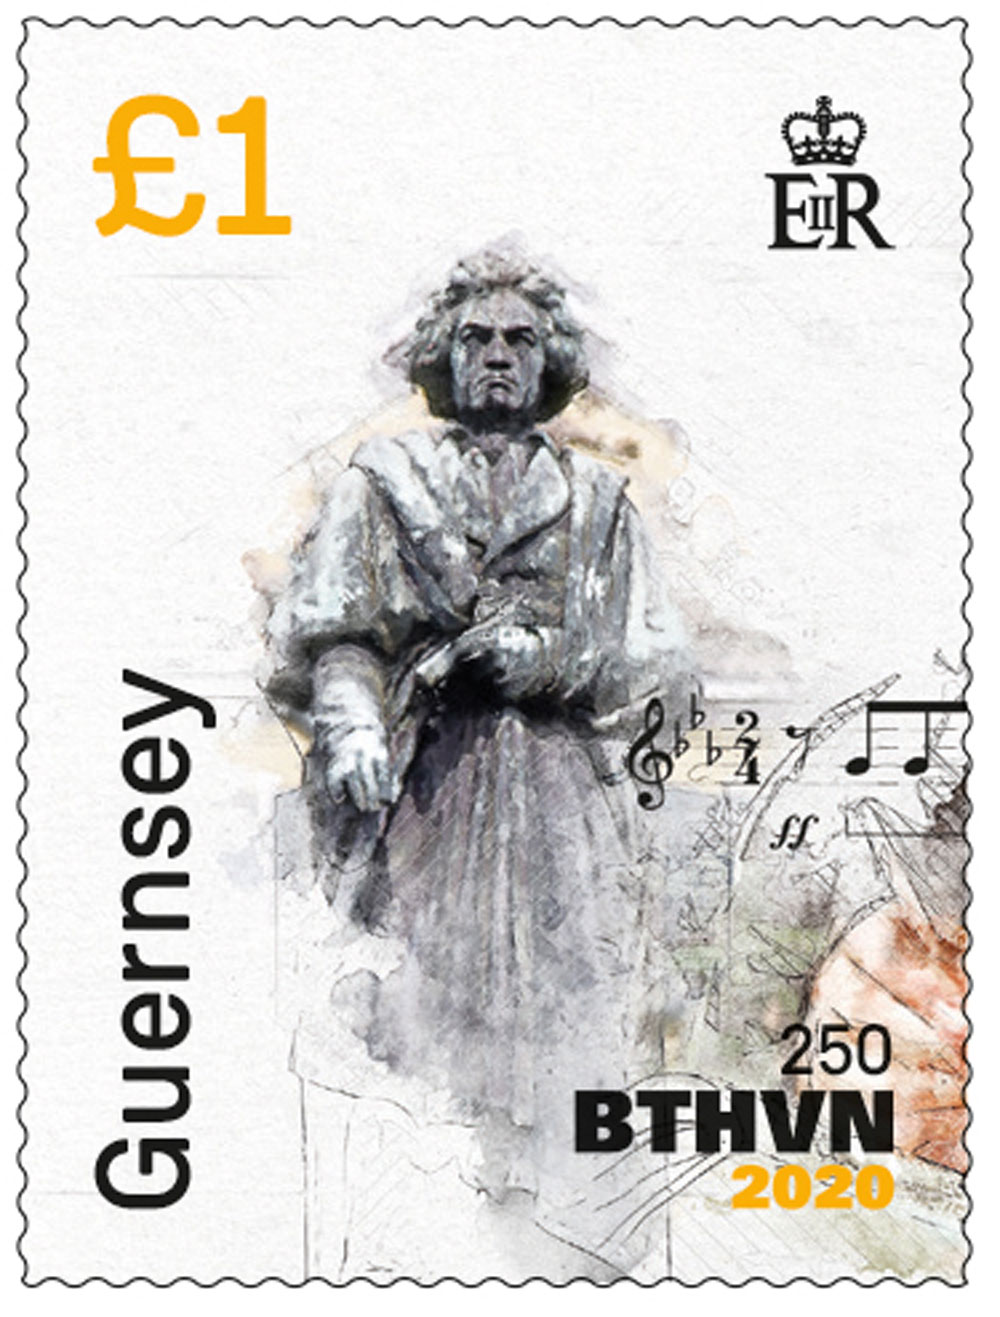 Guernsey to issue commemorative stamps for the 250th Anniversary of Beethoven's birth